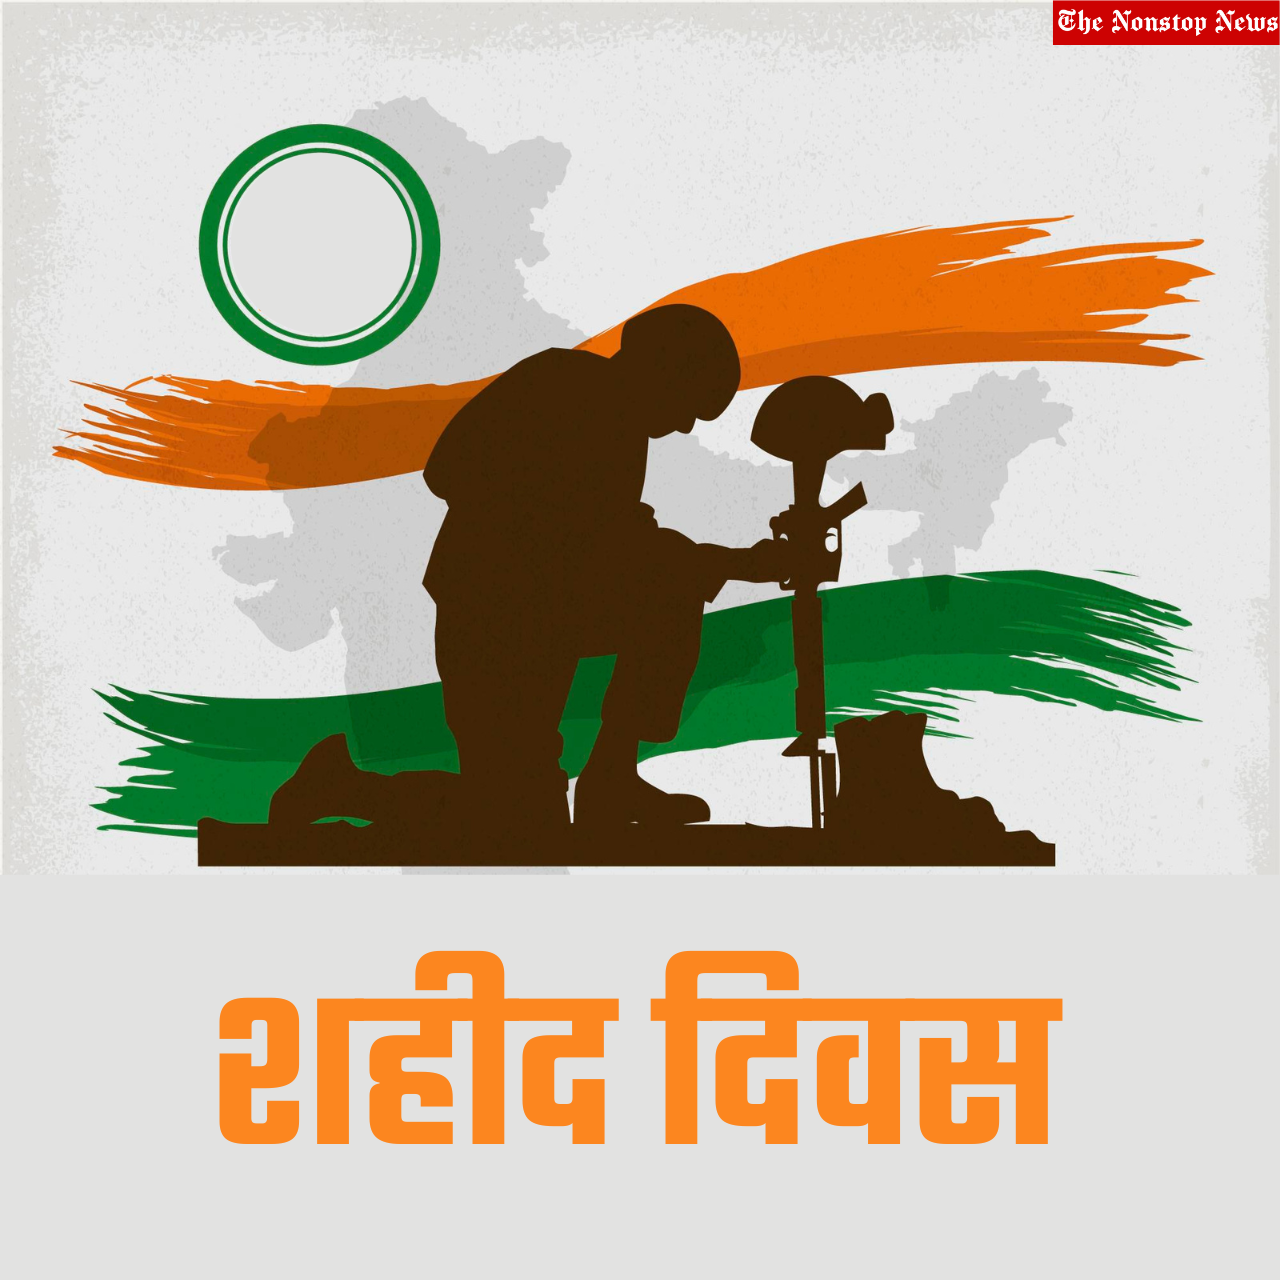 Shaheed Diwas 2023 Quotes in Hindi, Slogans, Shayari, Wishes, Images, Messages, Banners and Posters